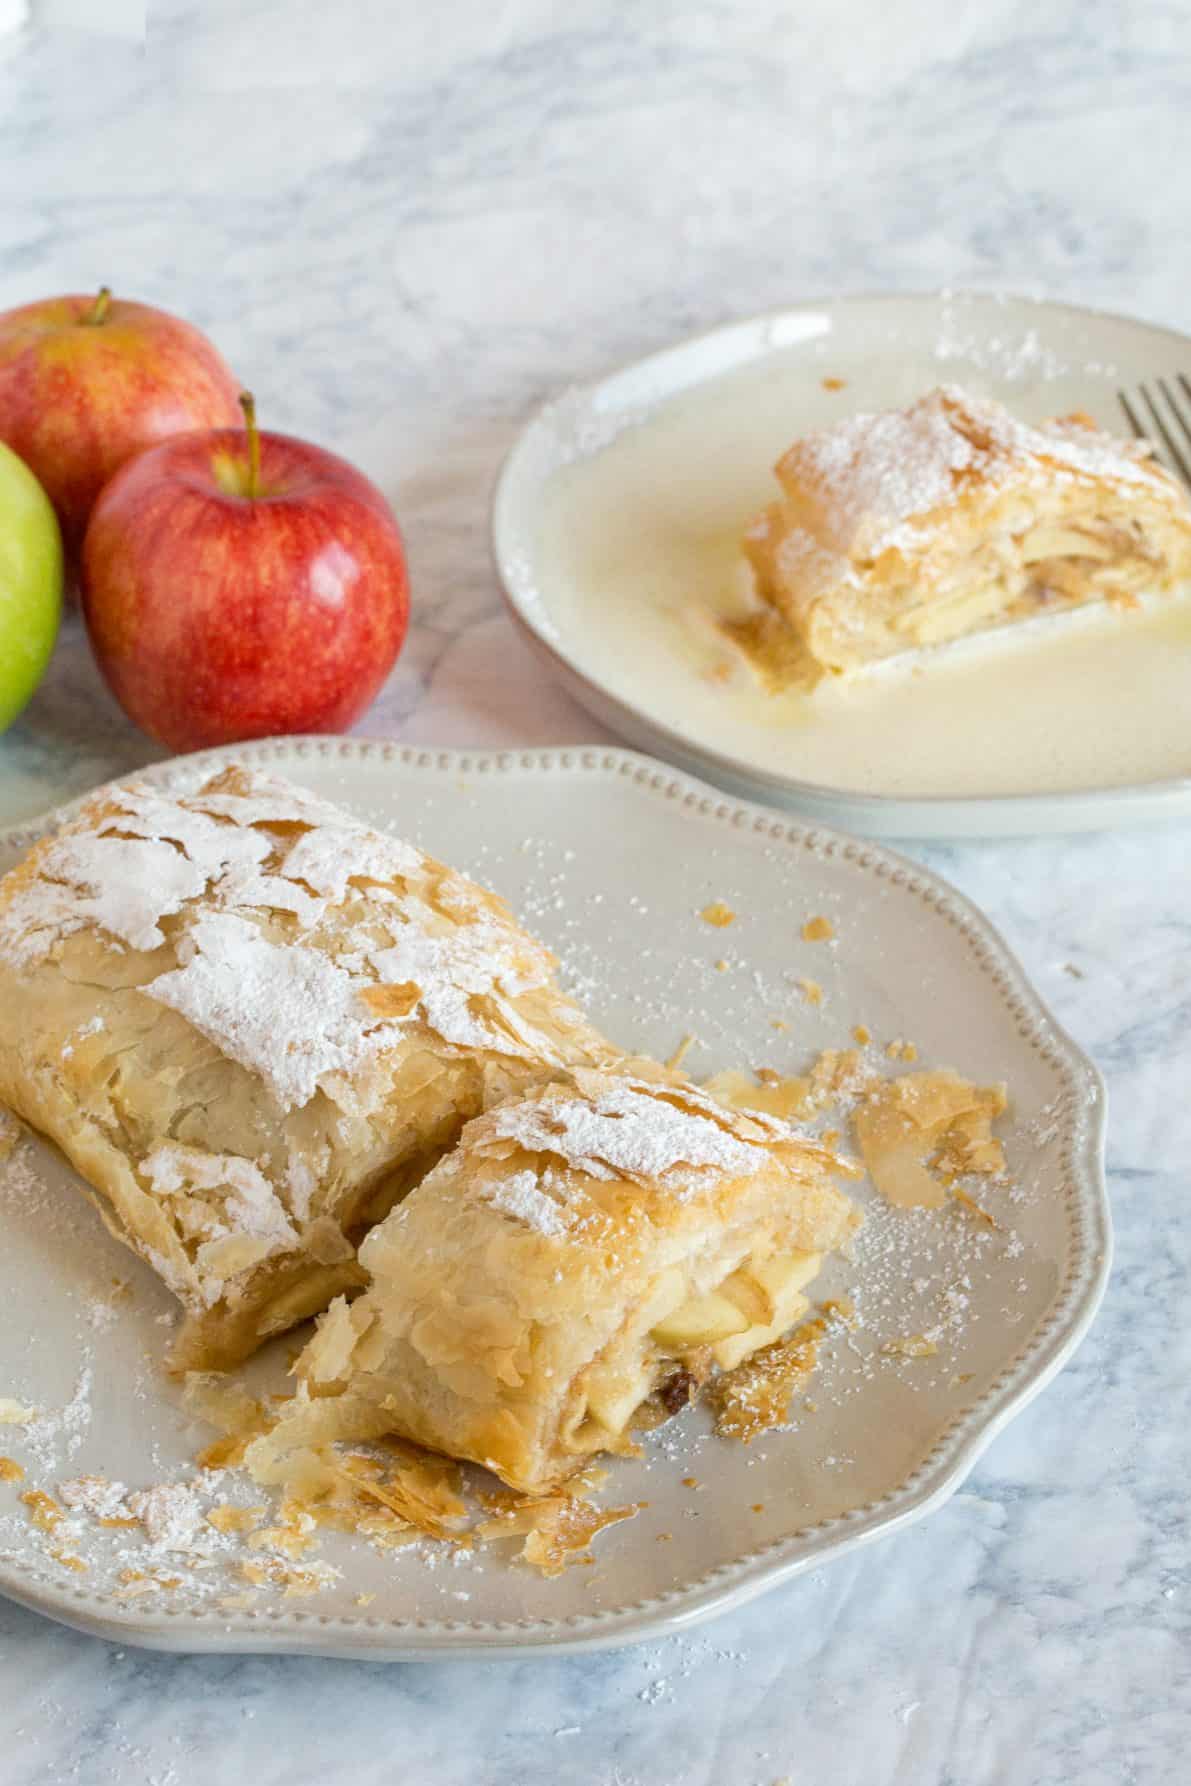 Apple strudel on a white plate.